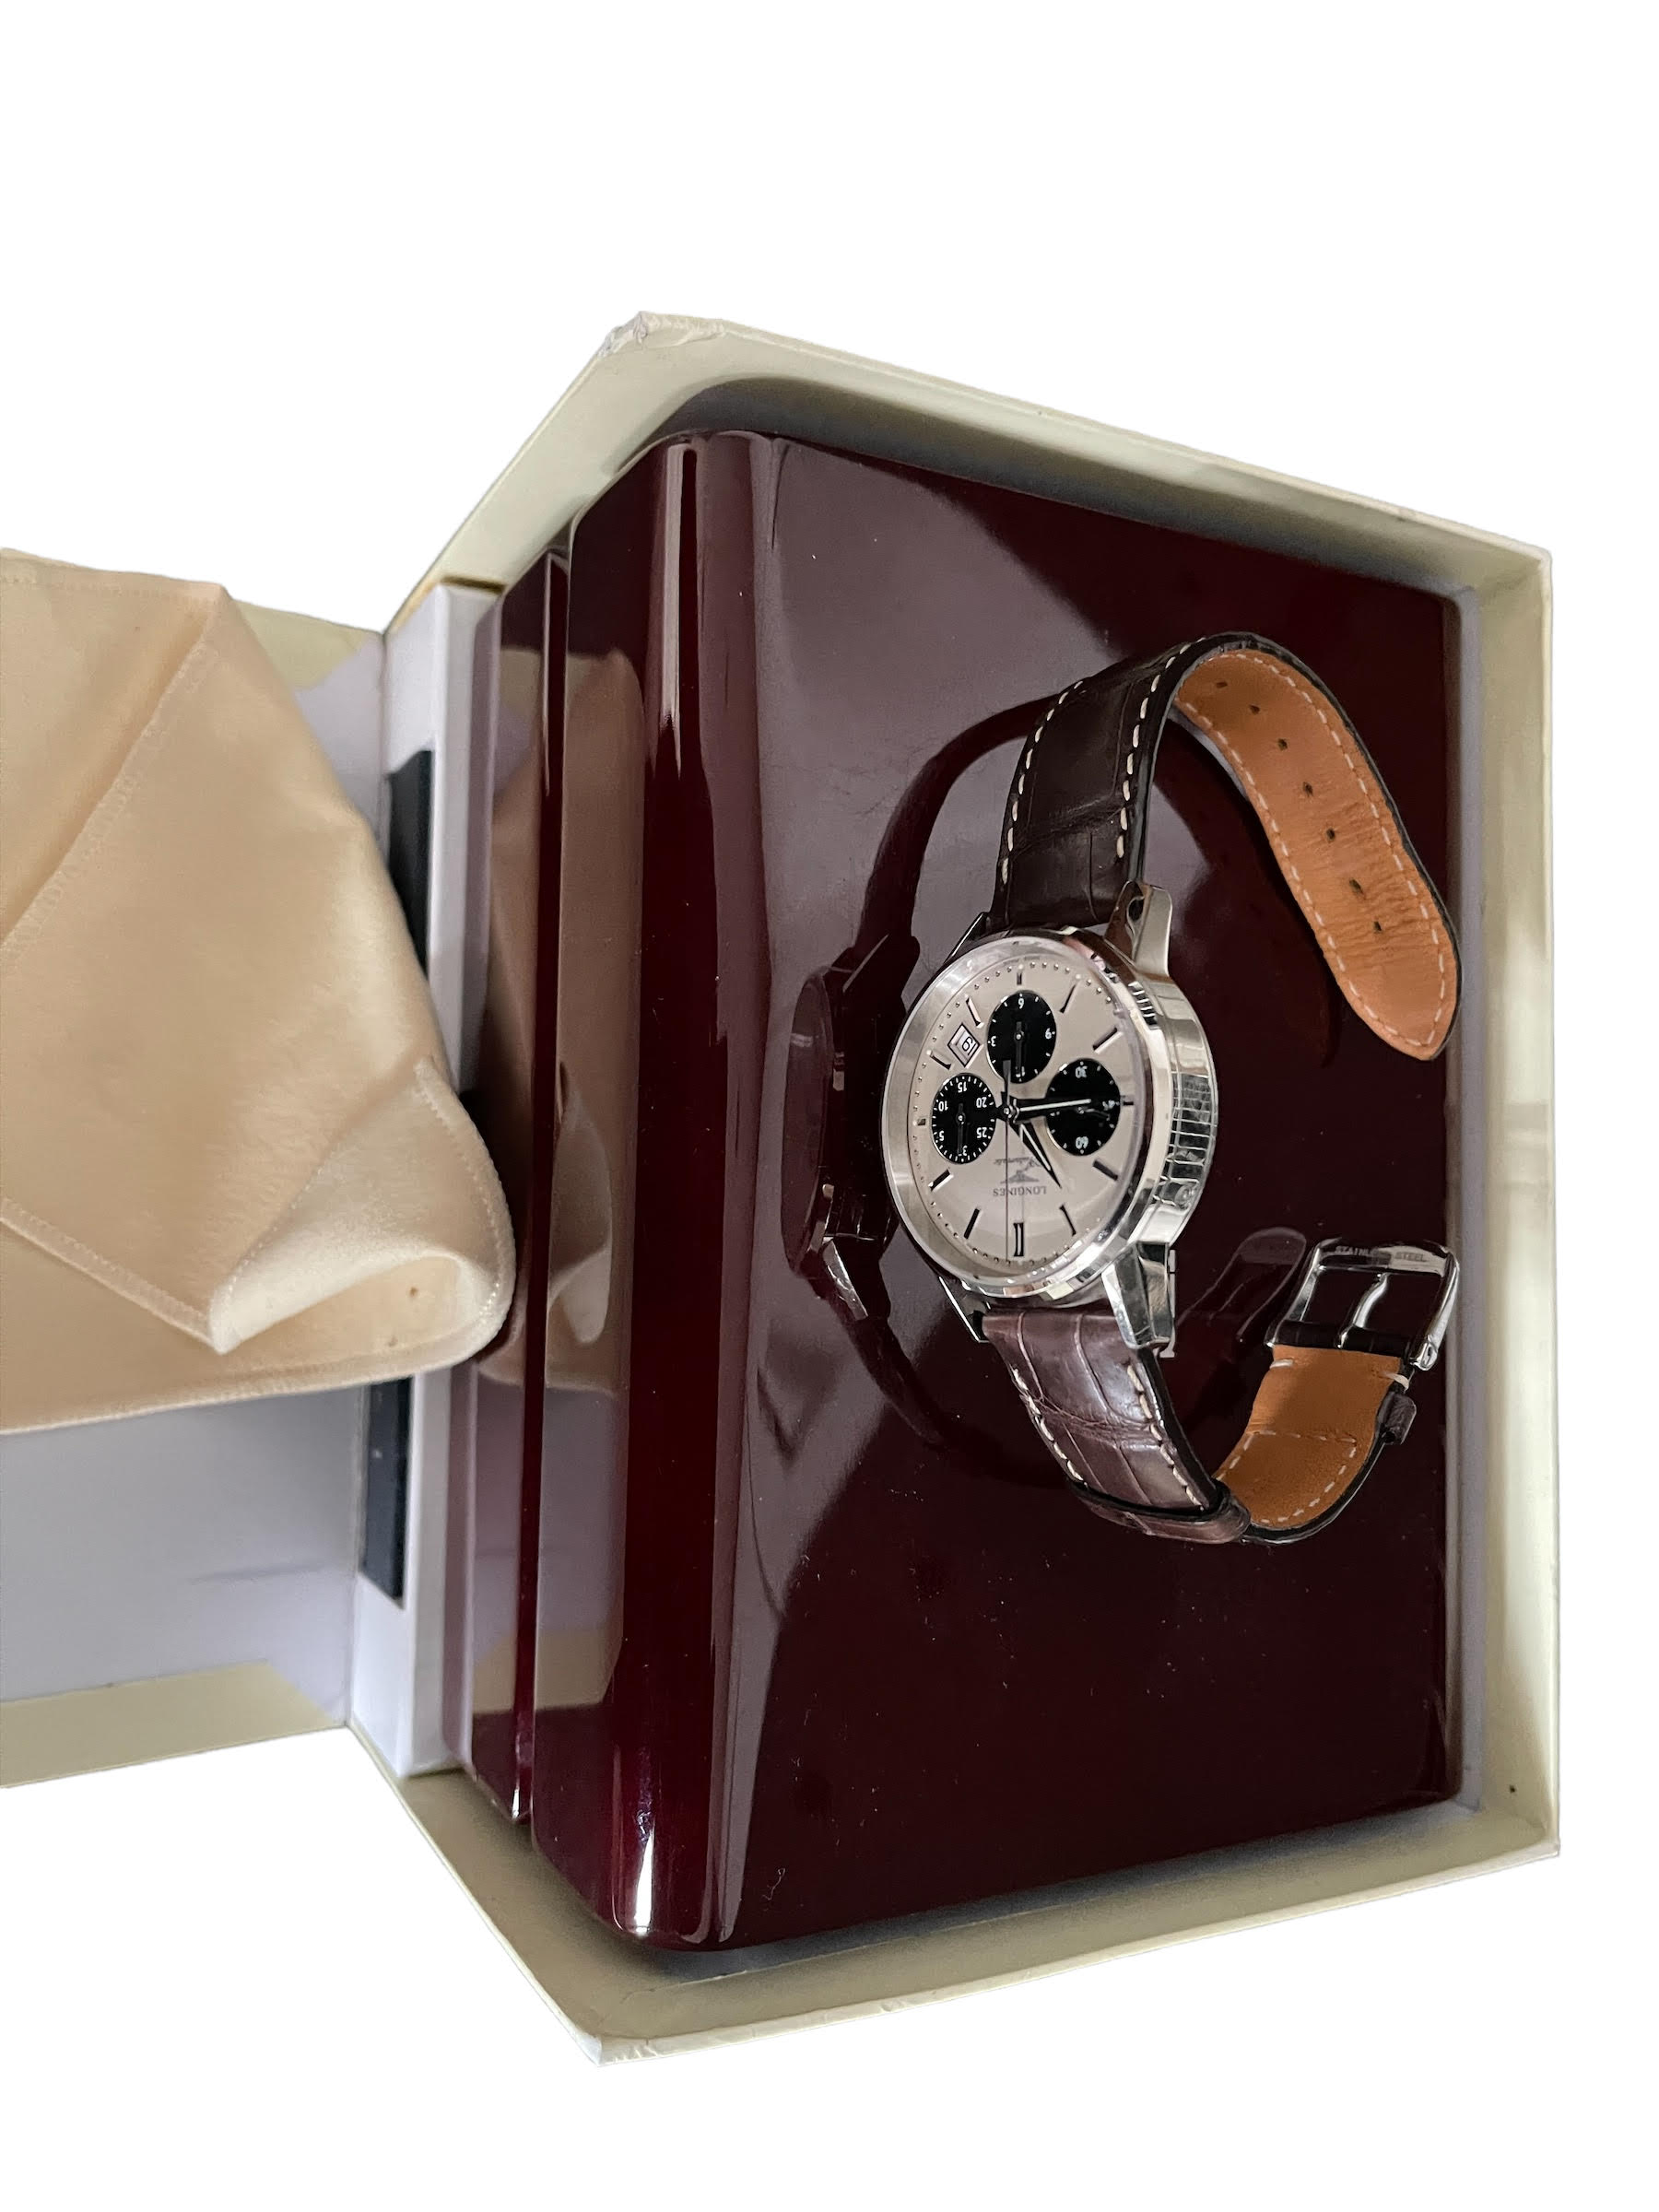 Longines Mens Chronograph Automatic Watch with box and papers, Ted Baker holdall. Lost property f... - Image 3 of 13